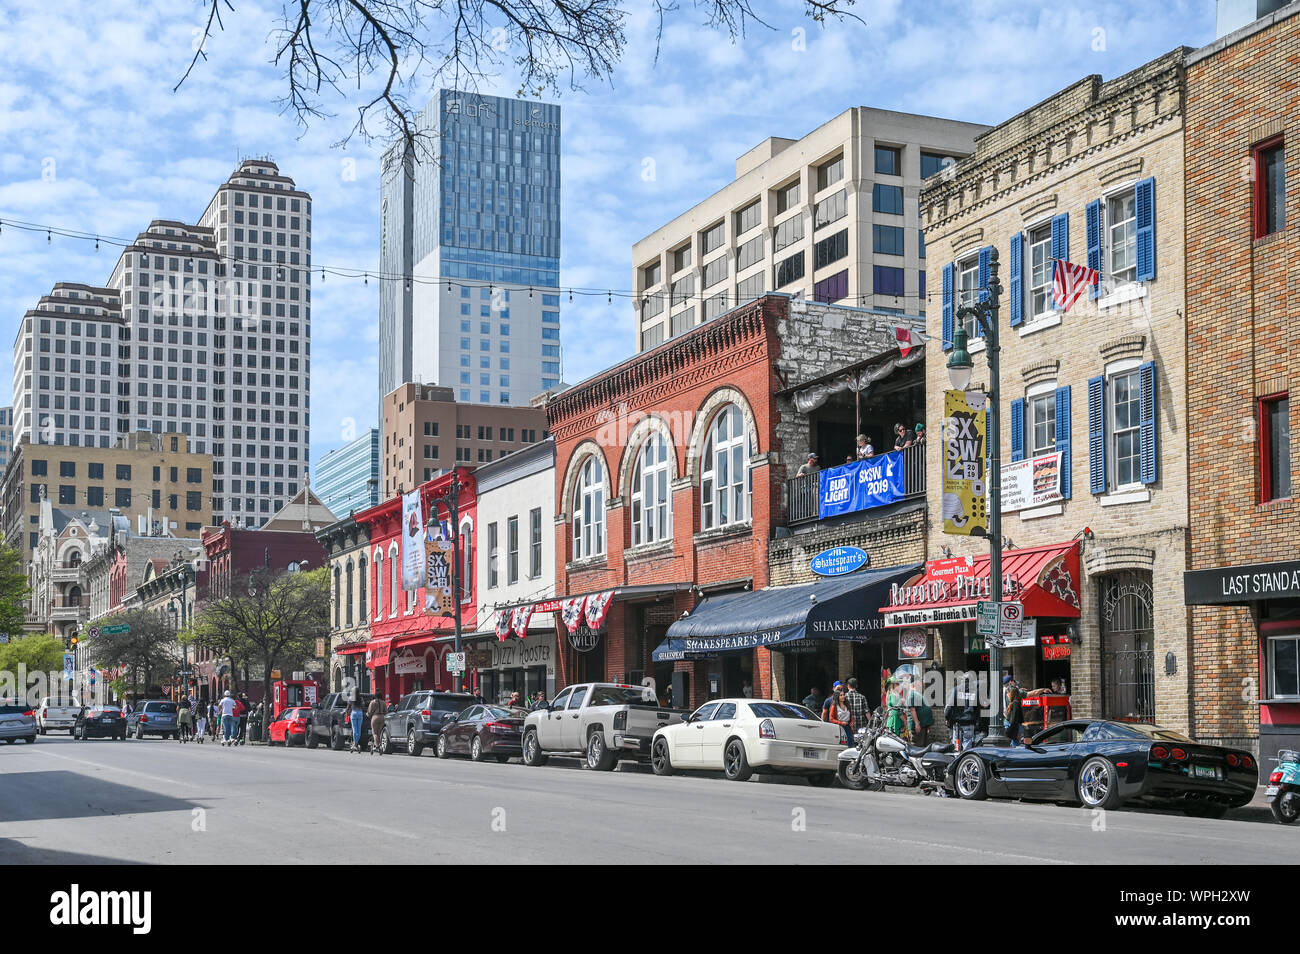 Sixth Street in Austin Texas during SXSW festival in March 2019. This historic street is famous for its live music bars. Stock Photo